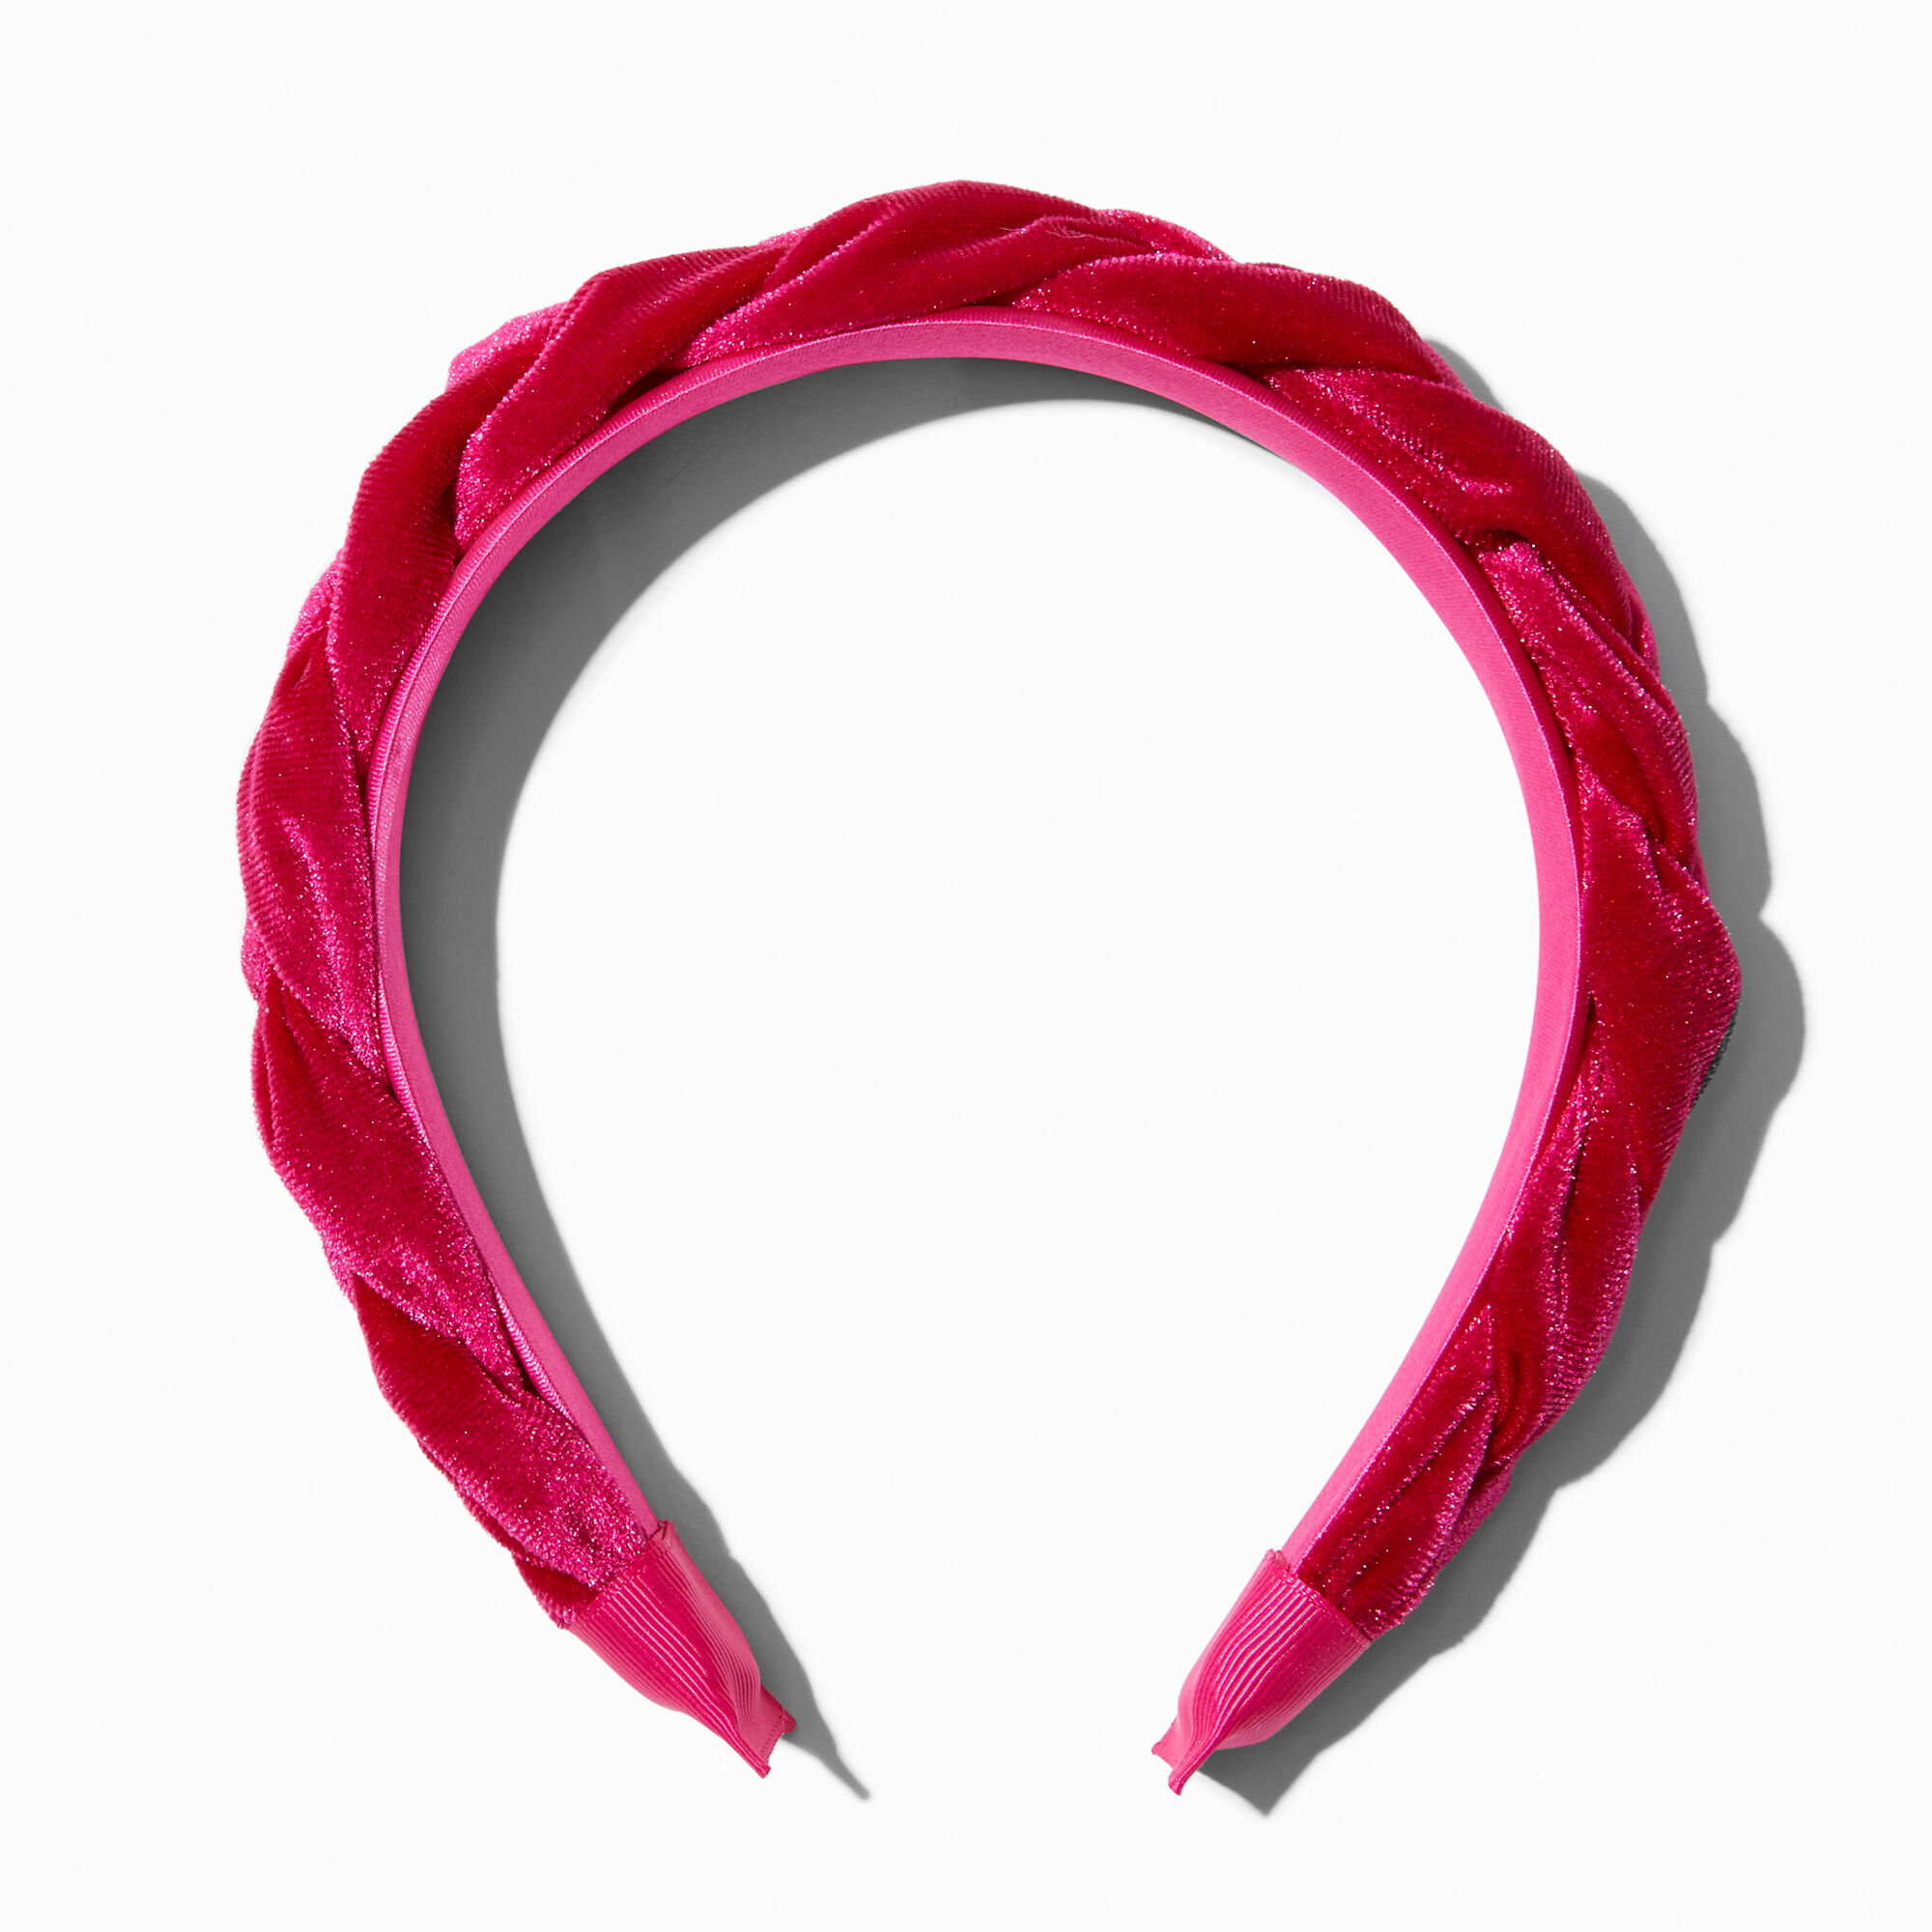 View Claires Braided Headband Pink information